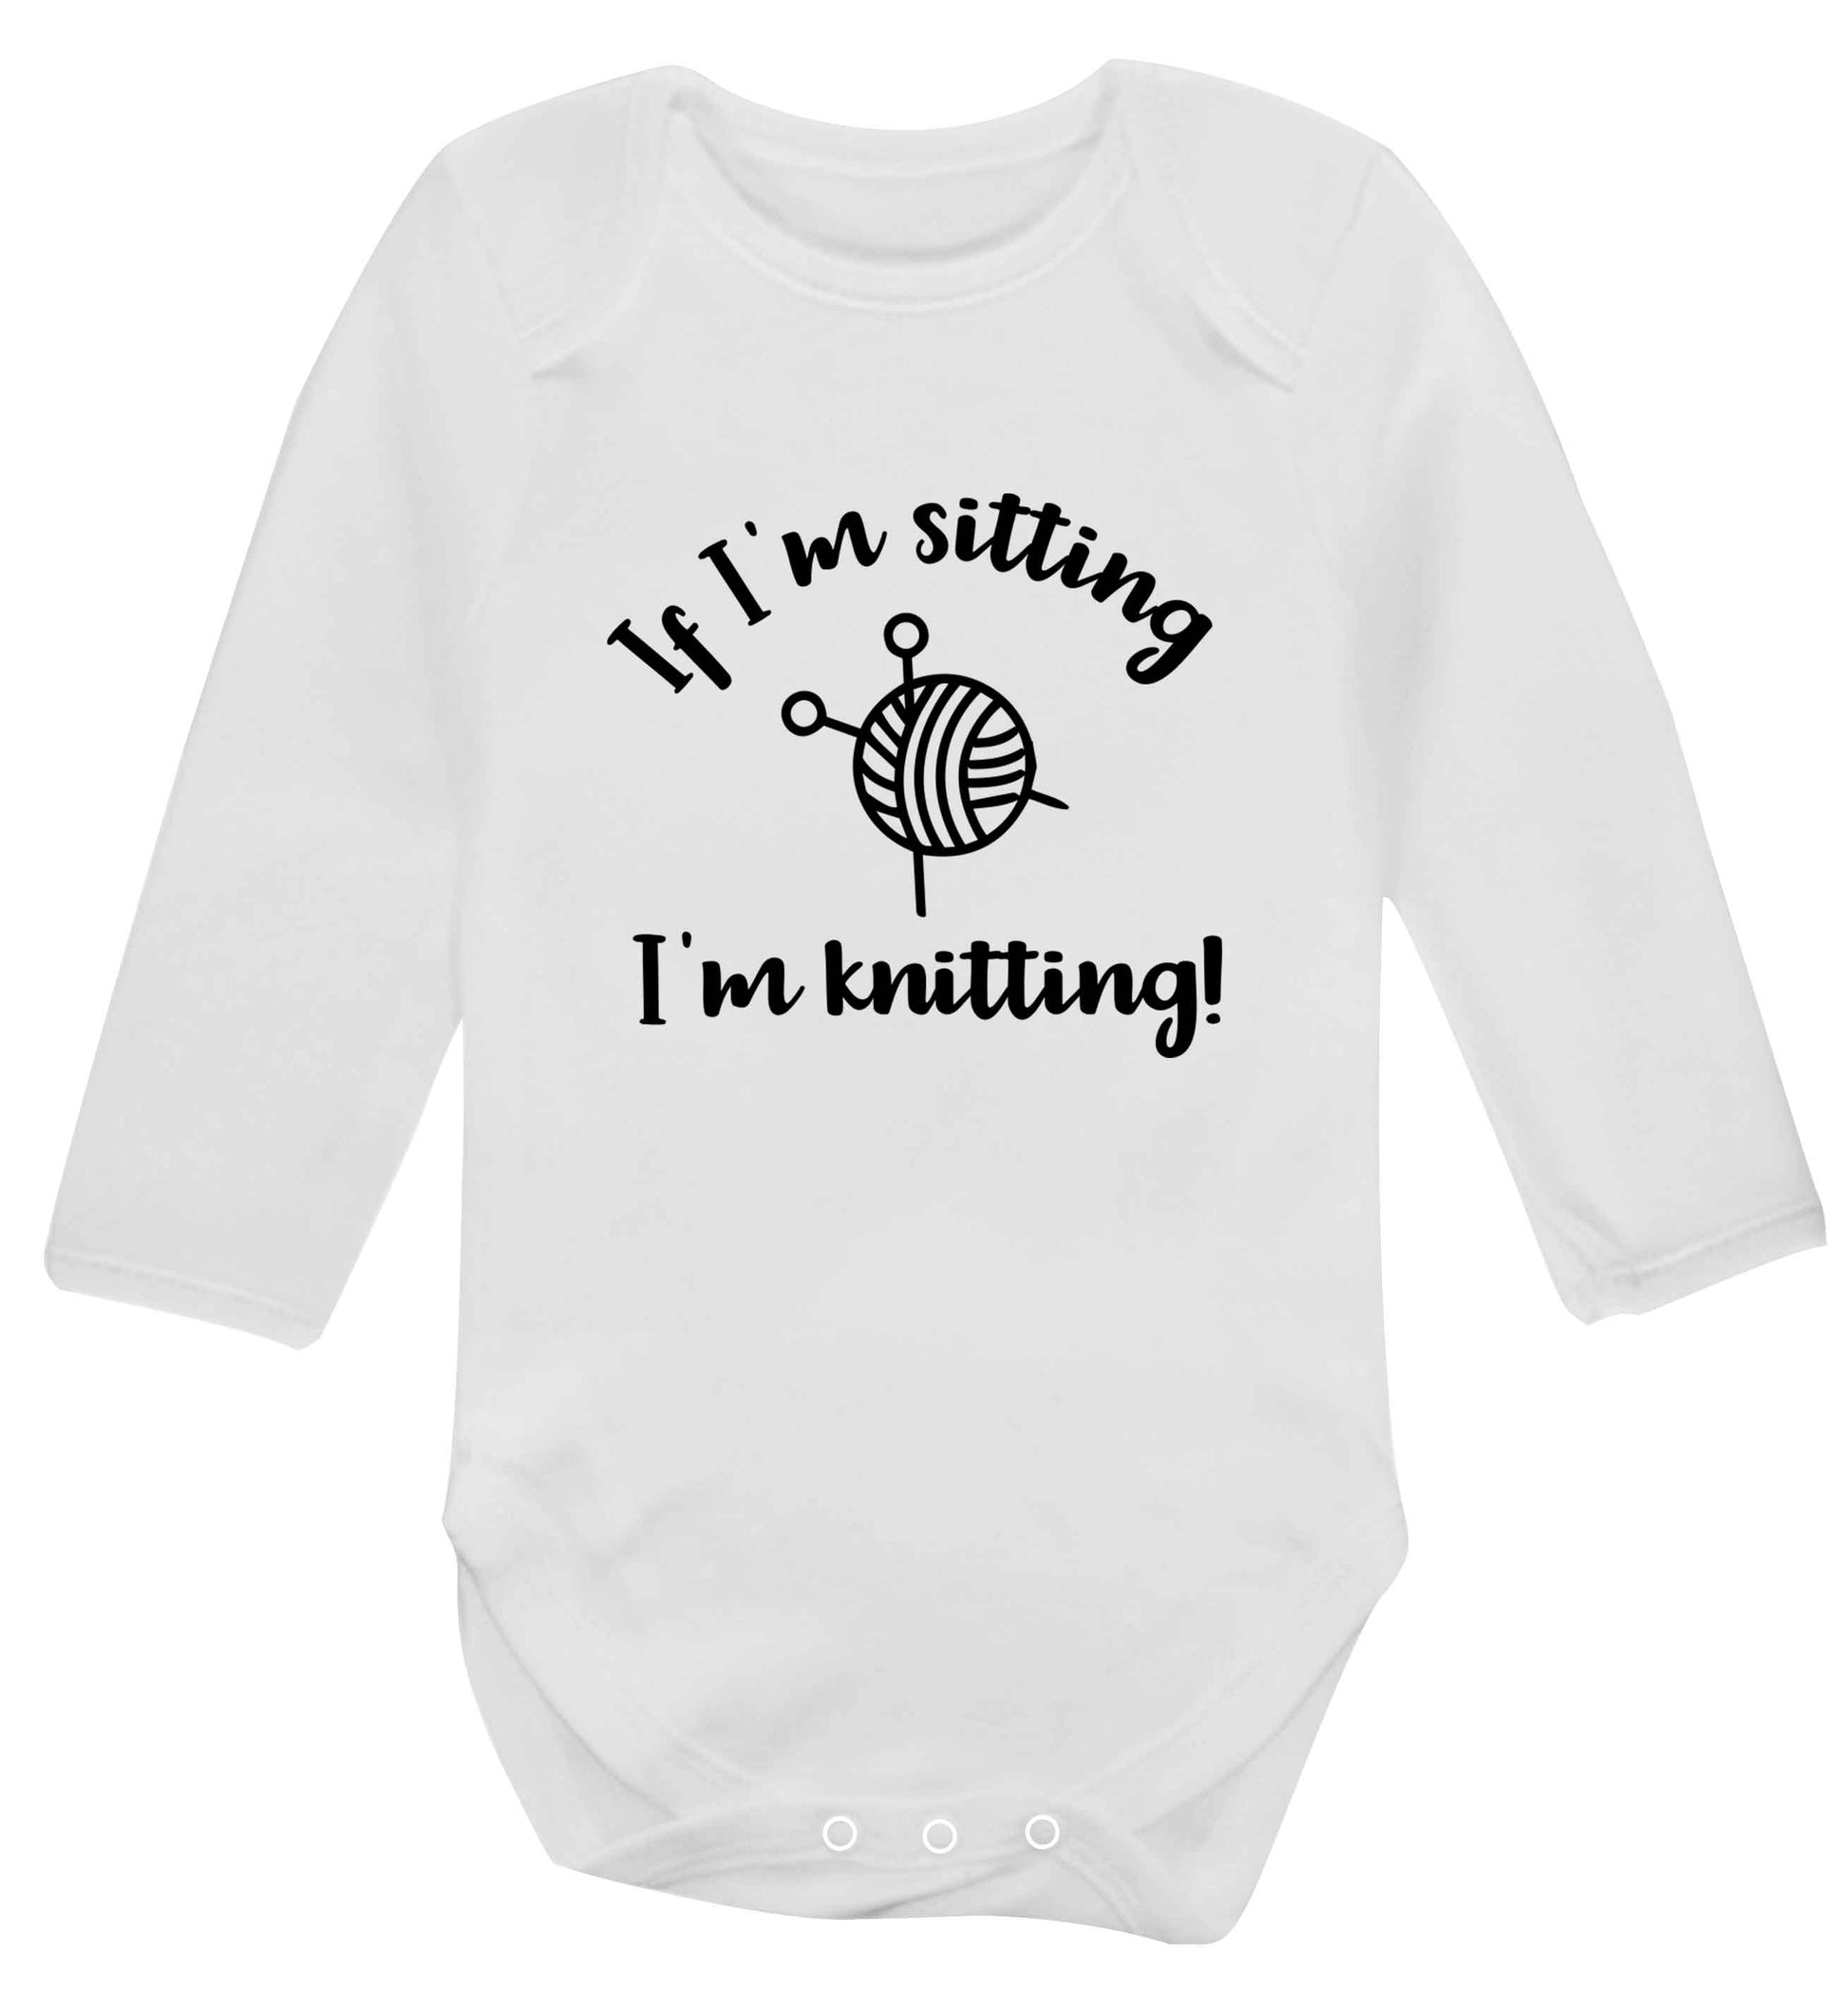 Merry Christmas baby vest long sleeved white 6-12 months